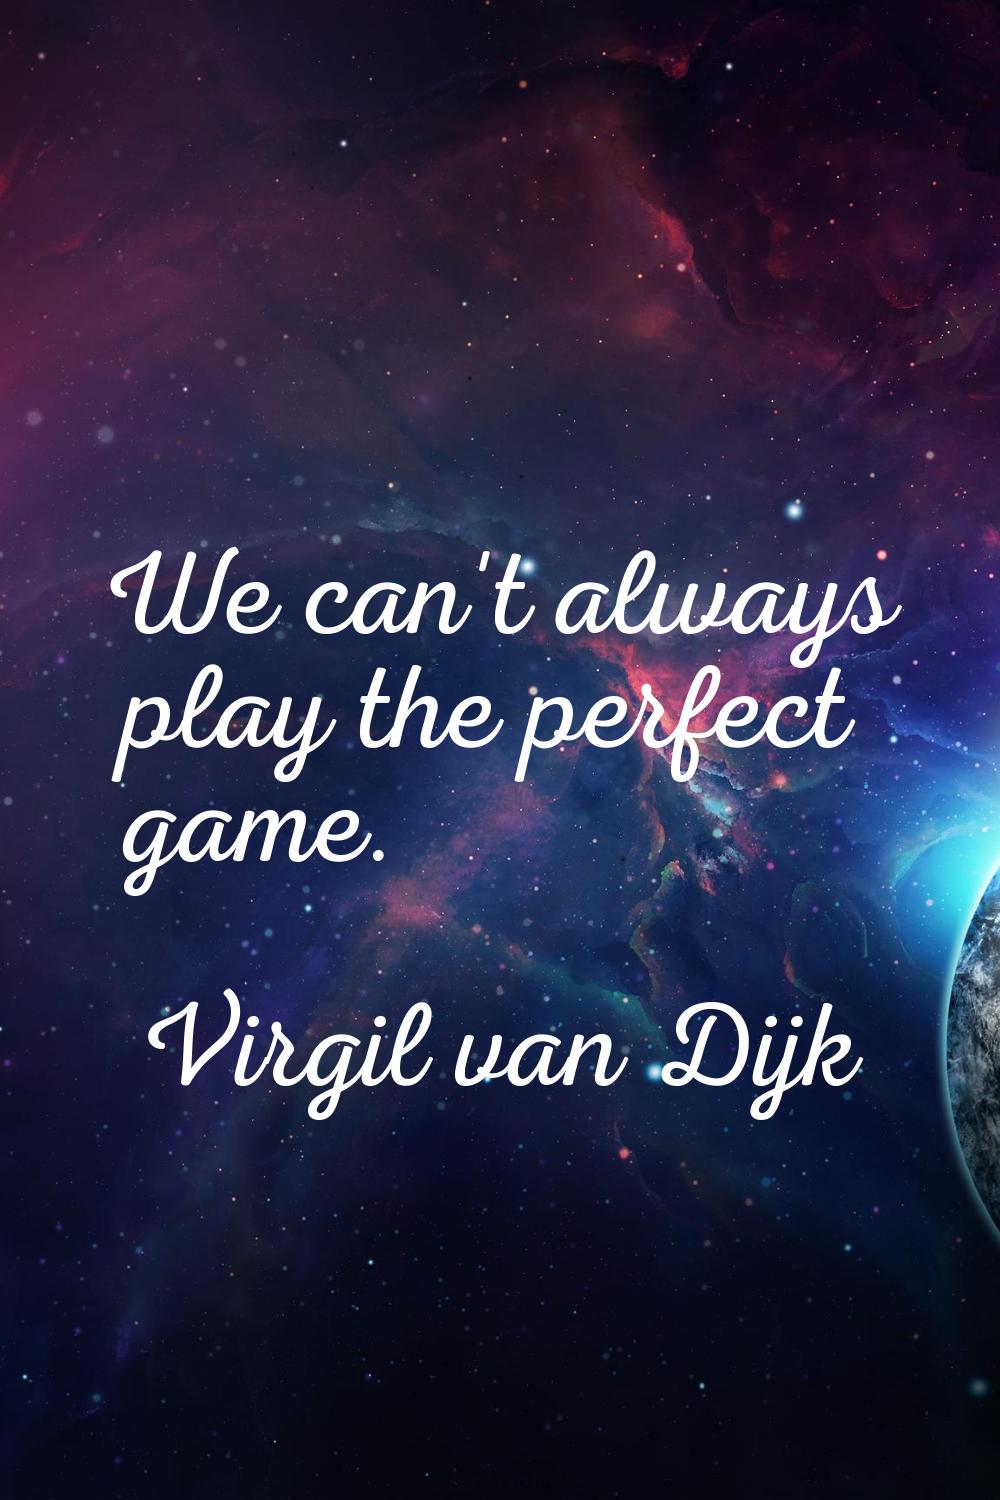 We can't always play the perfect game.